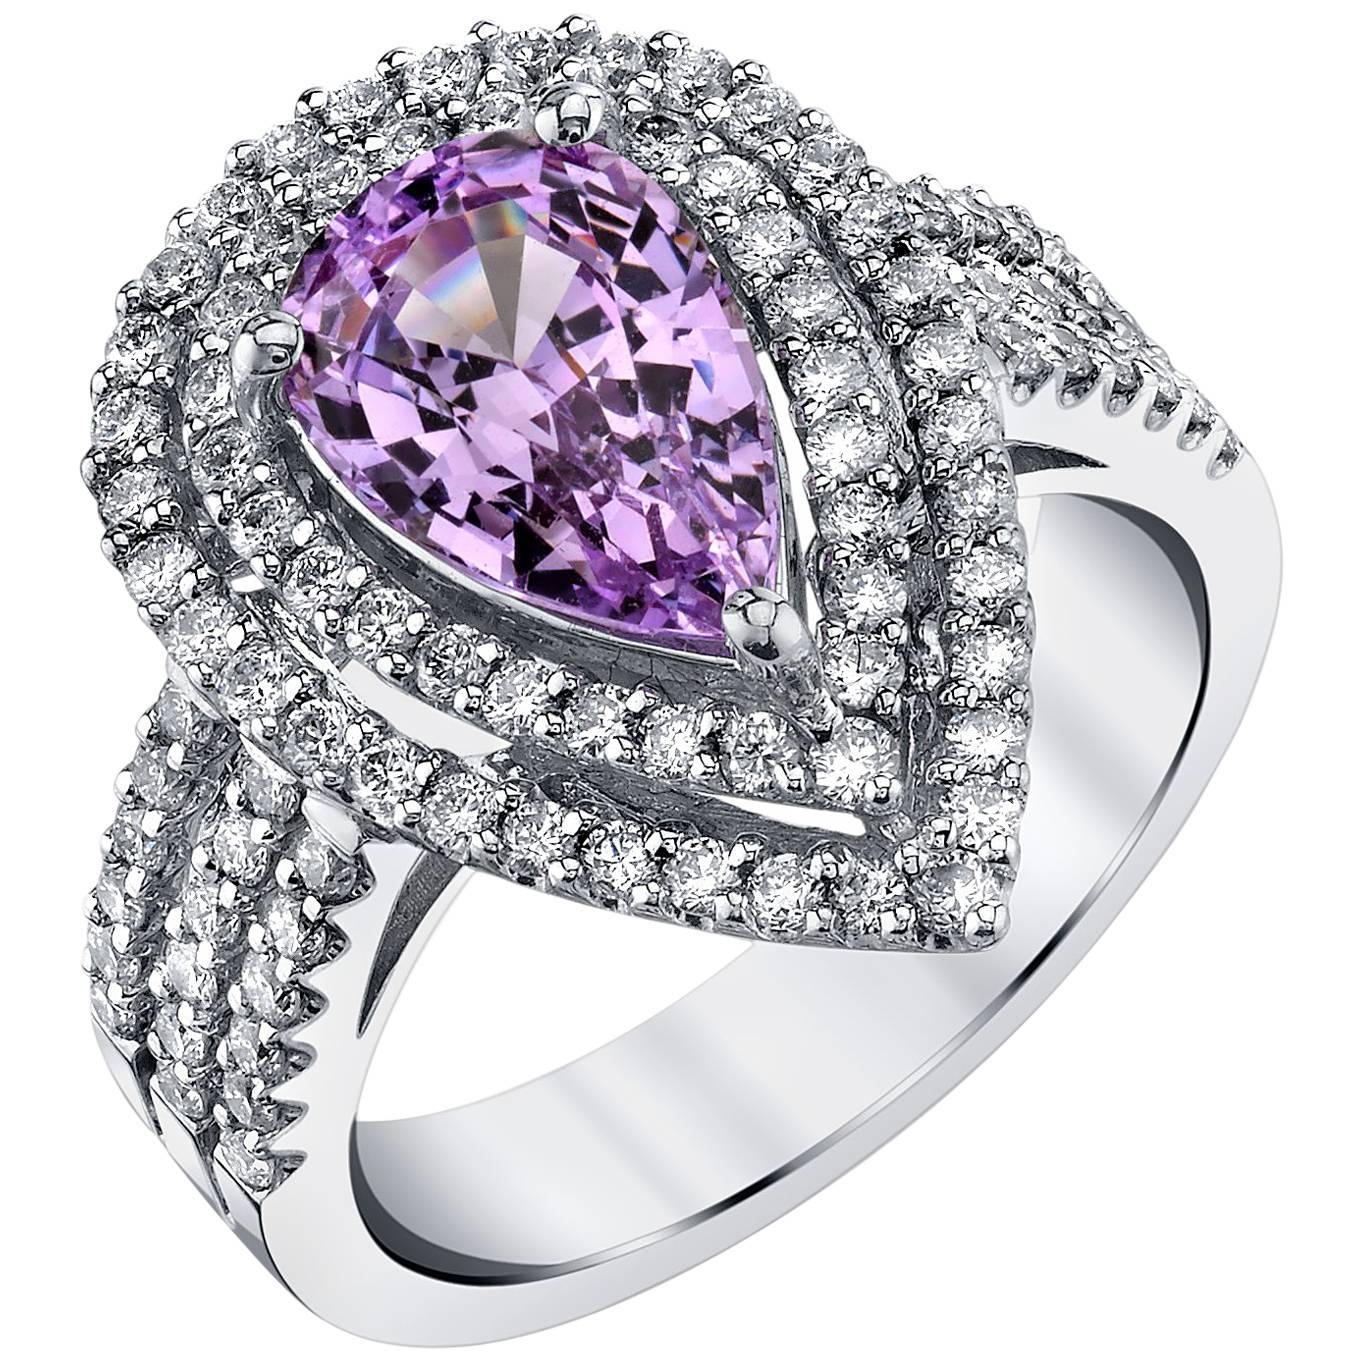 2.29 Carat Lavender Spinel and Diamond Halo Cocktail Ring in 18k White Gold For Sale